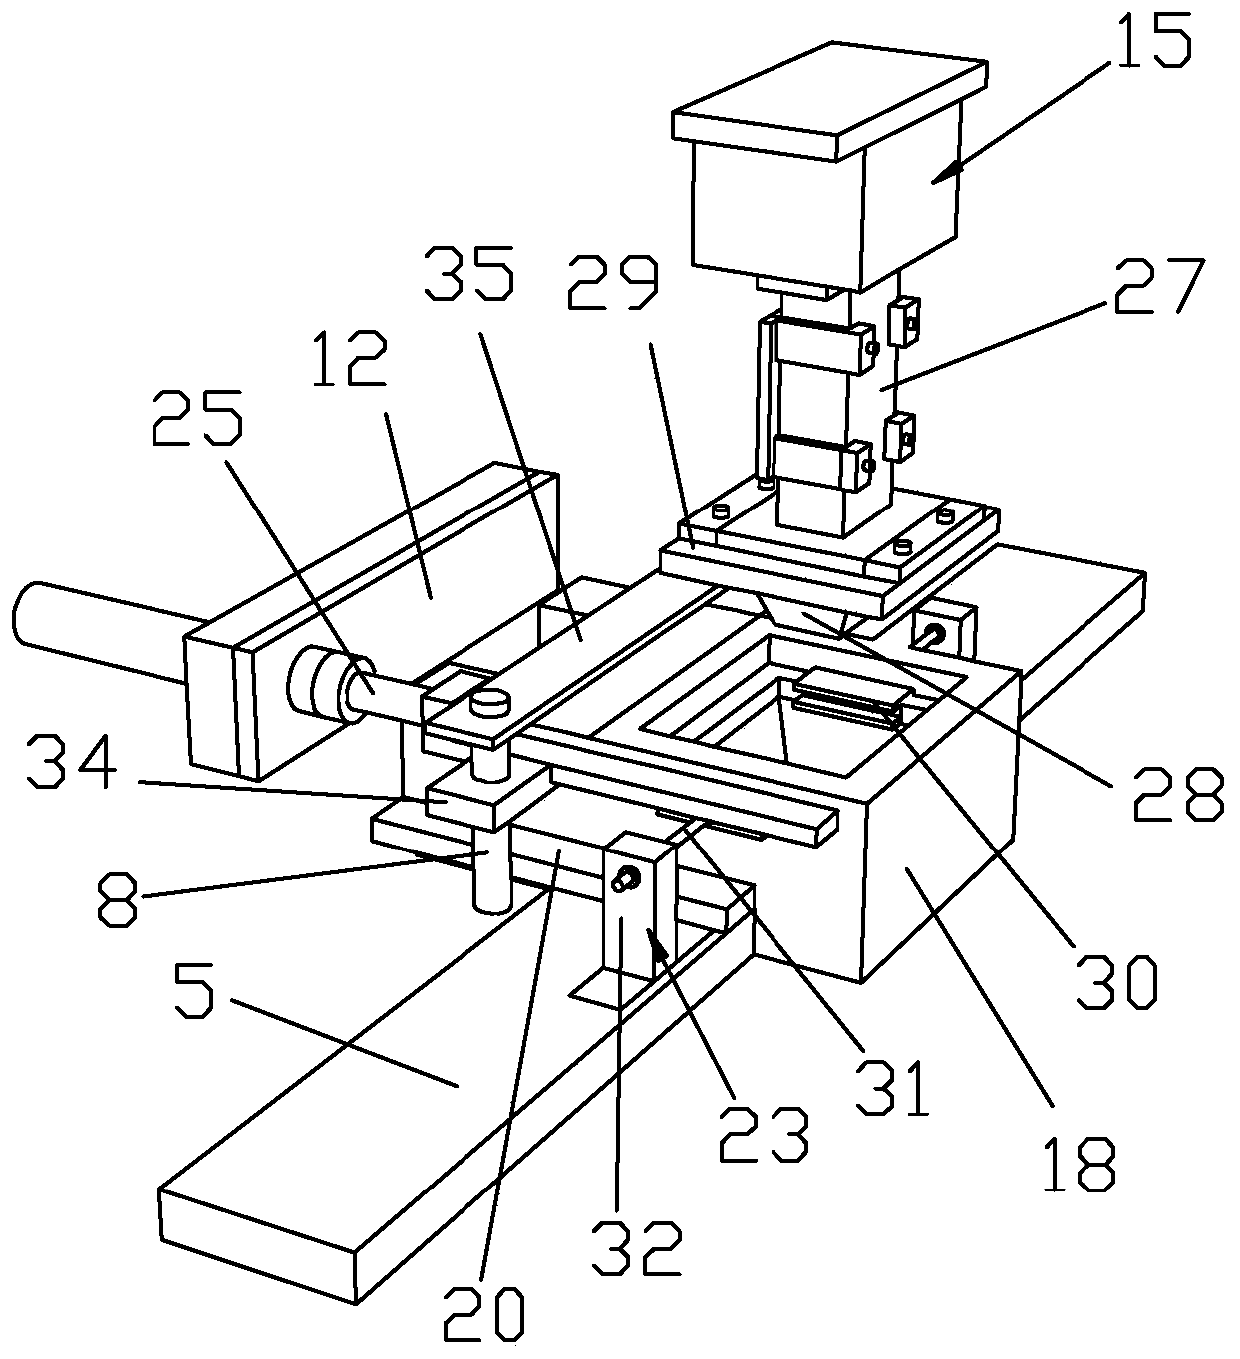 A stamping and crimping device for producing range hood net covers